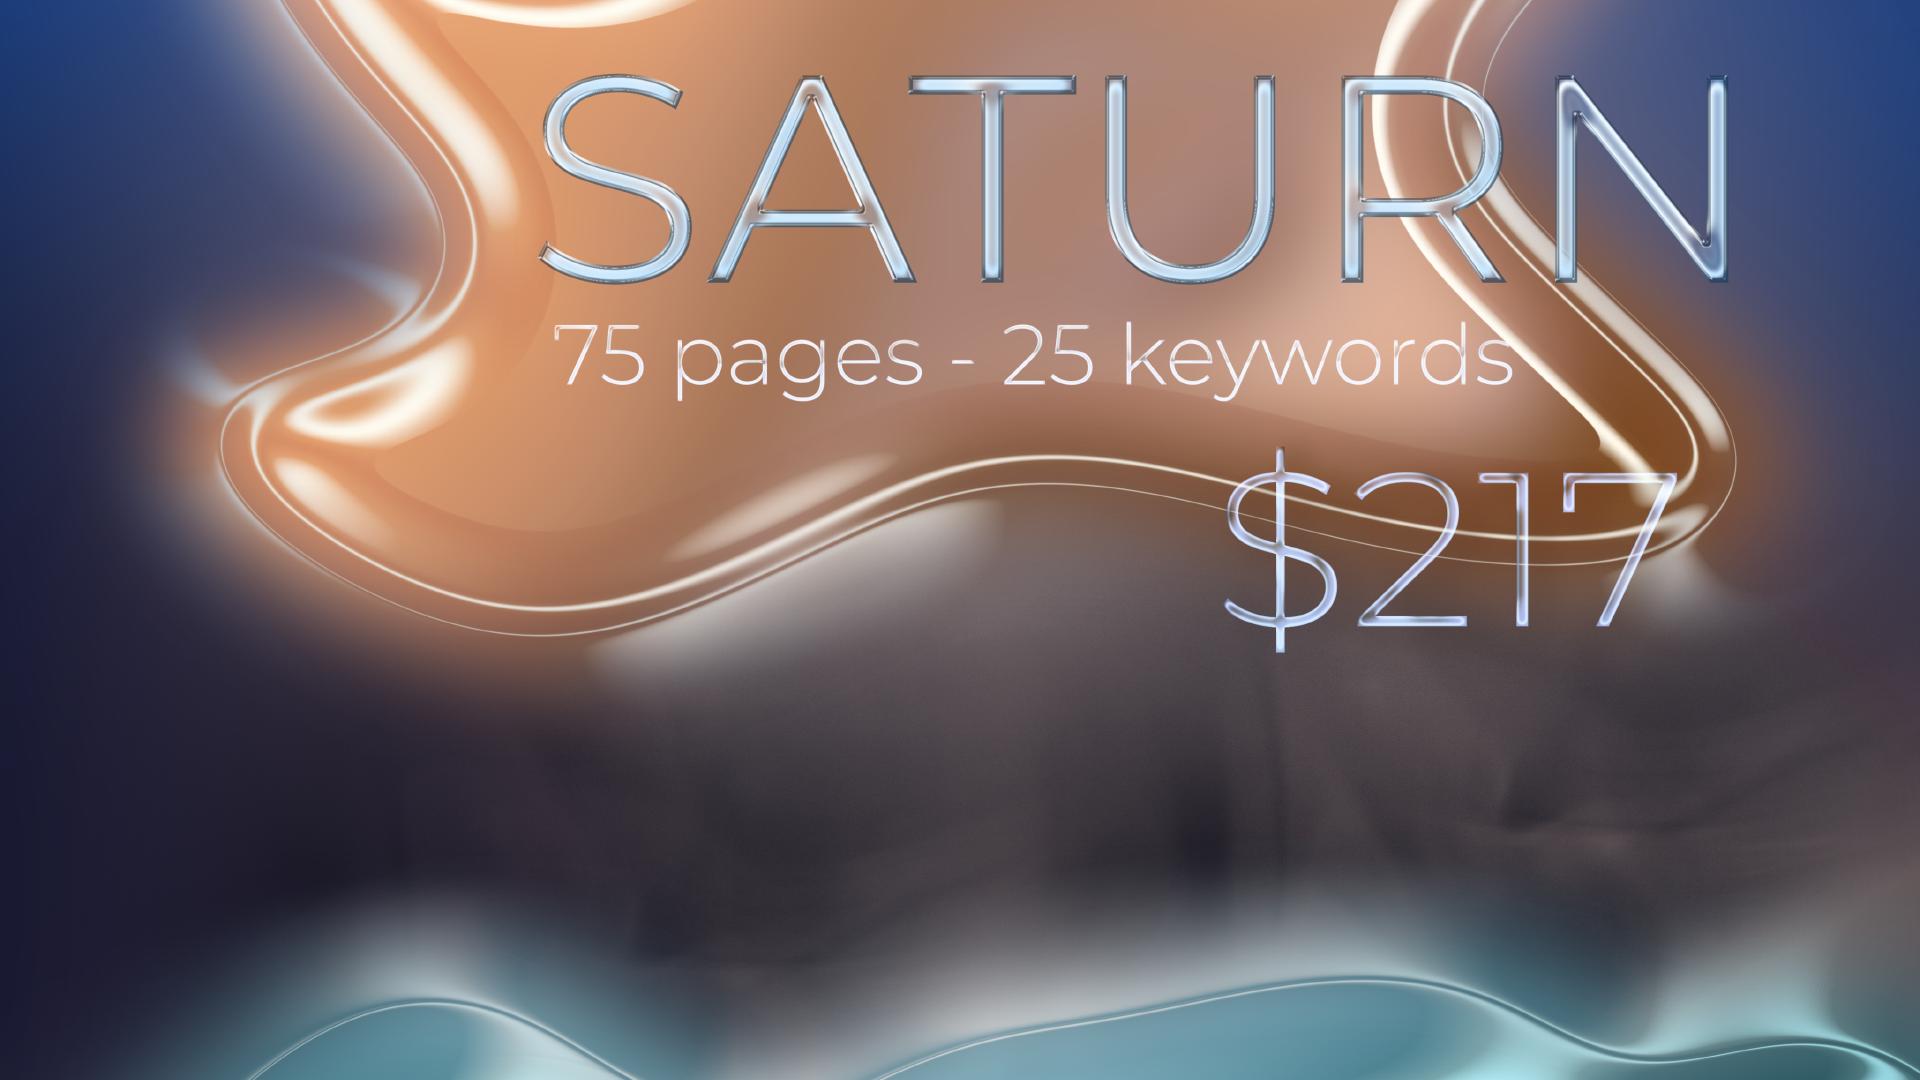 SEO package 'Saturn': 75 pages - 25 keywords for $217